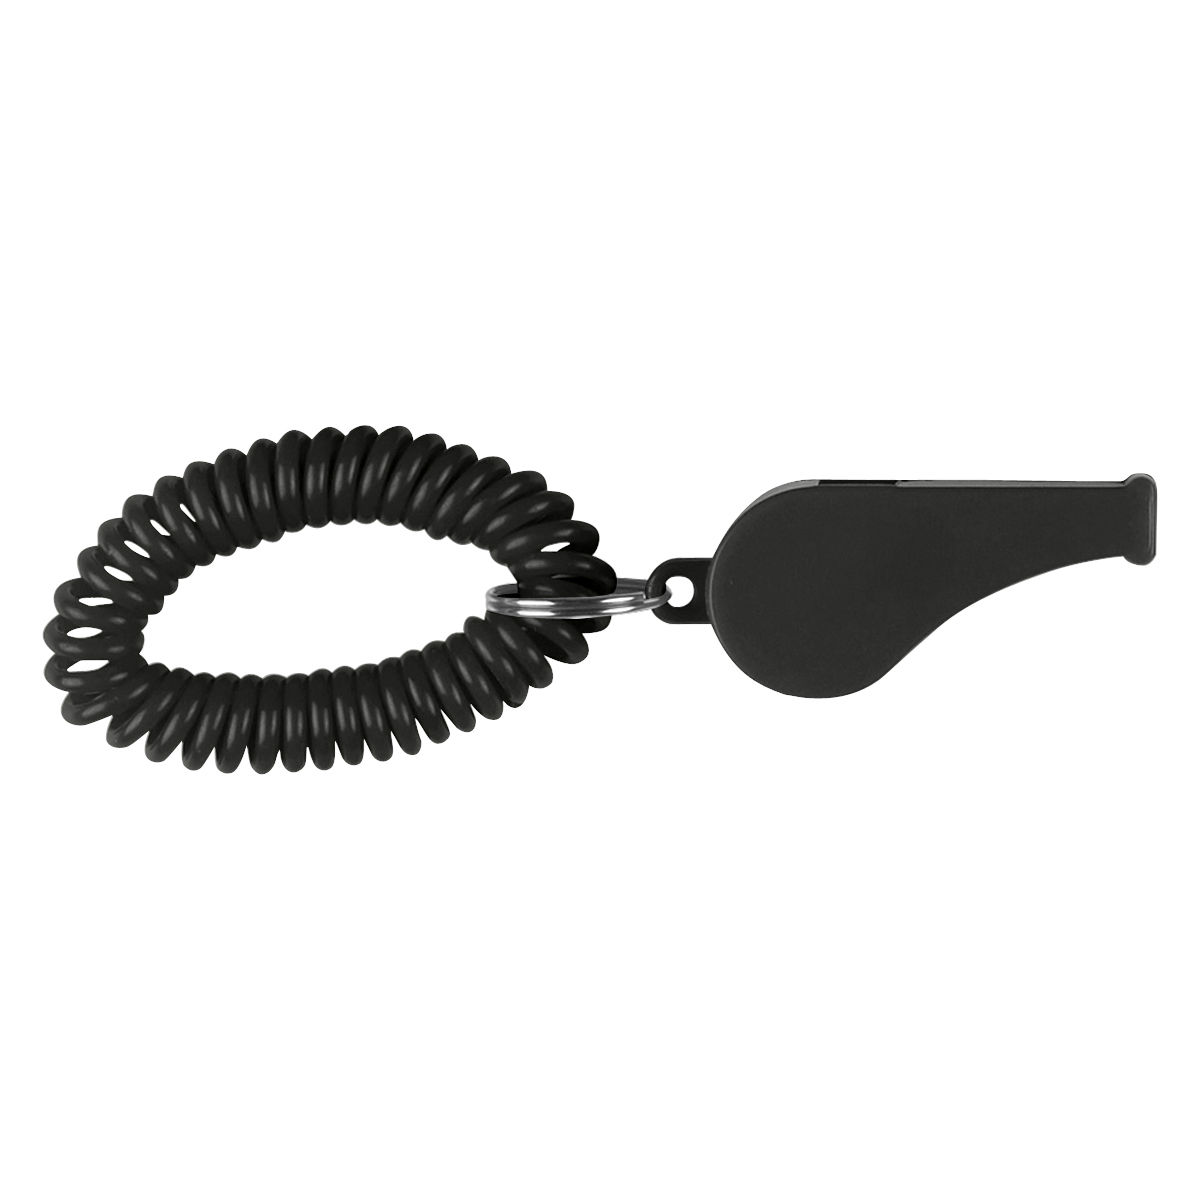 Black Whistle with Coil